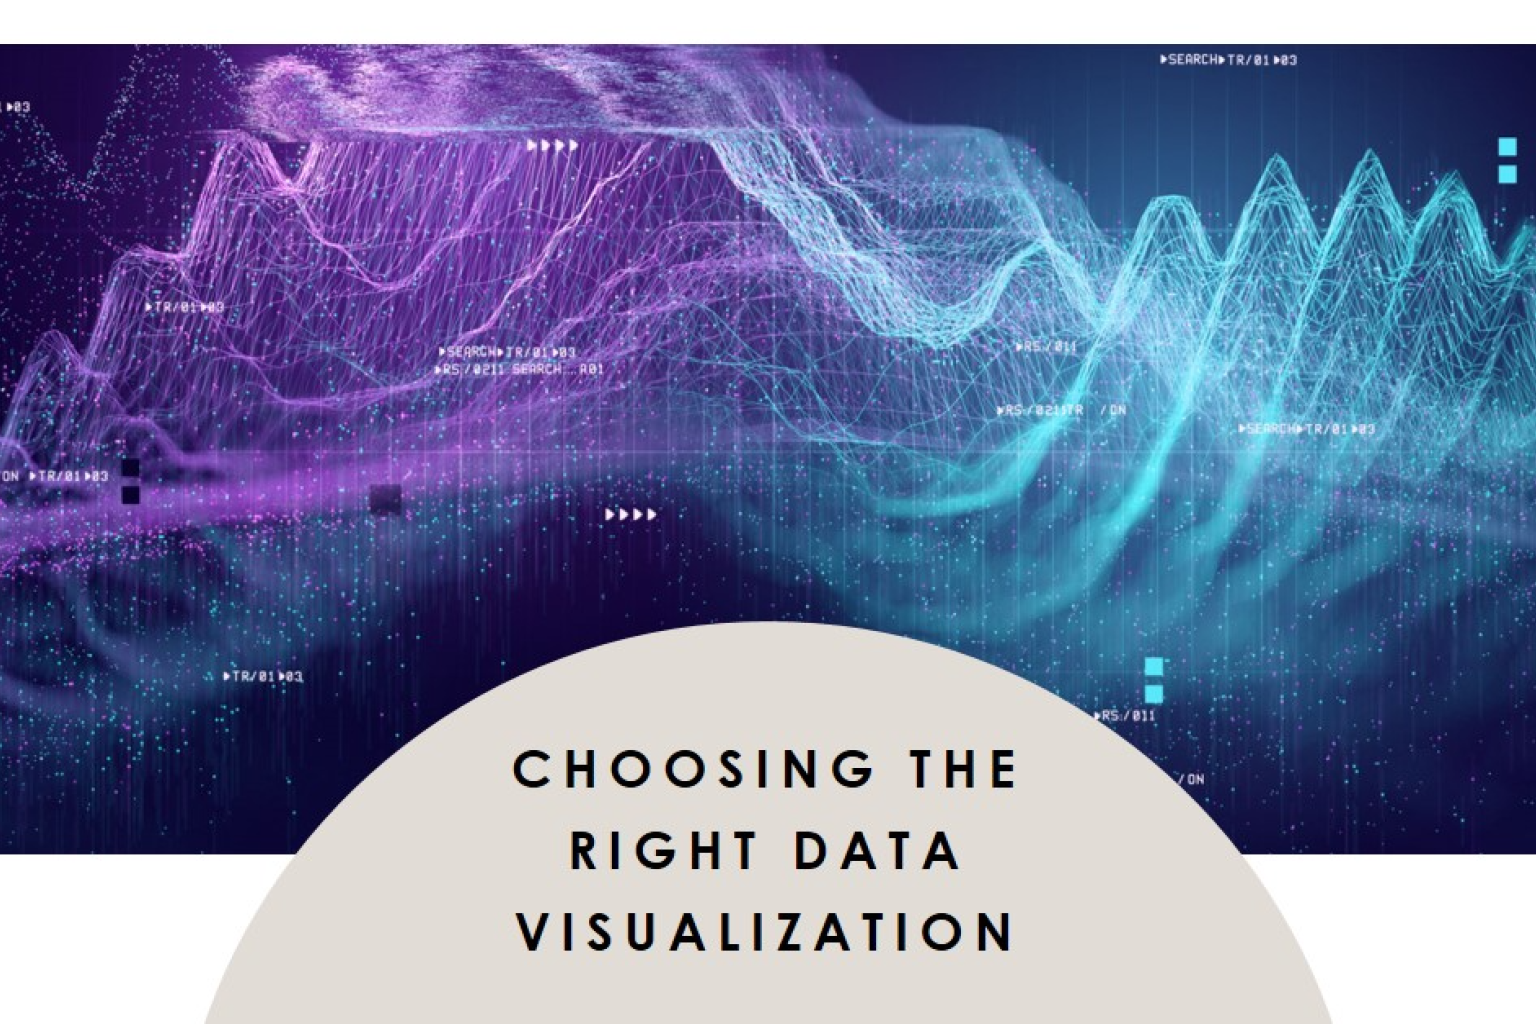 Learn how to select the best data visualization for your data. Explore types of charts and tips for effective data representation in this tutorial.